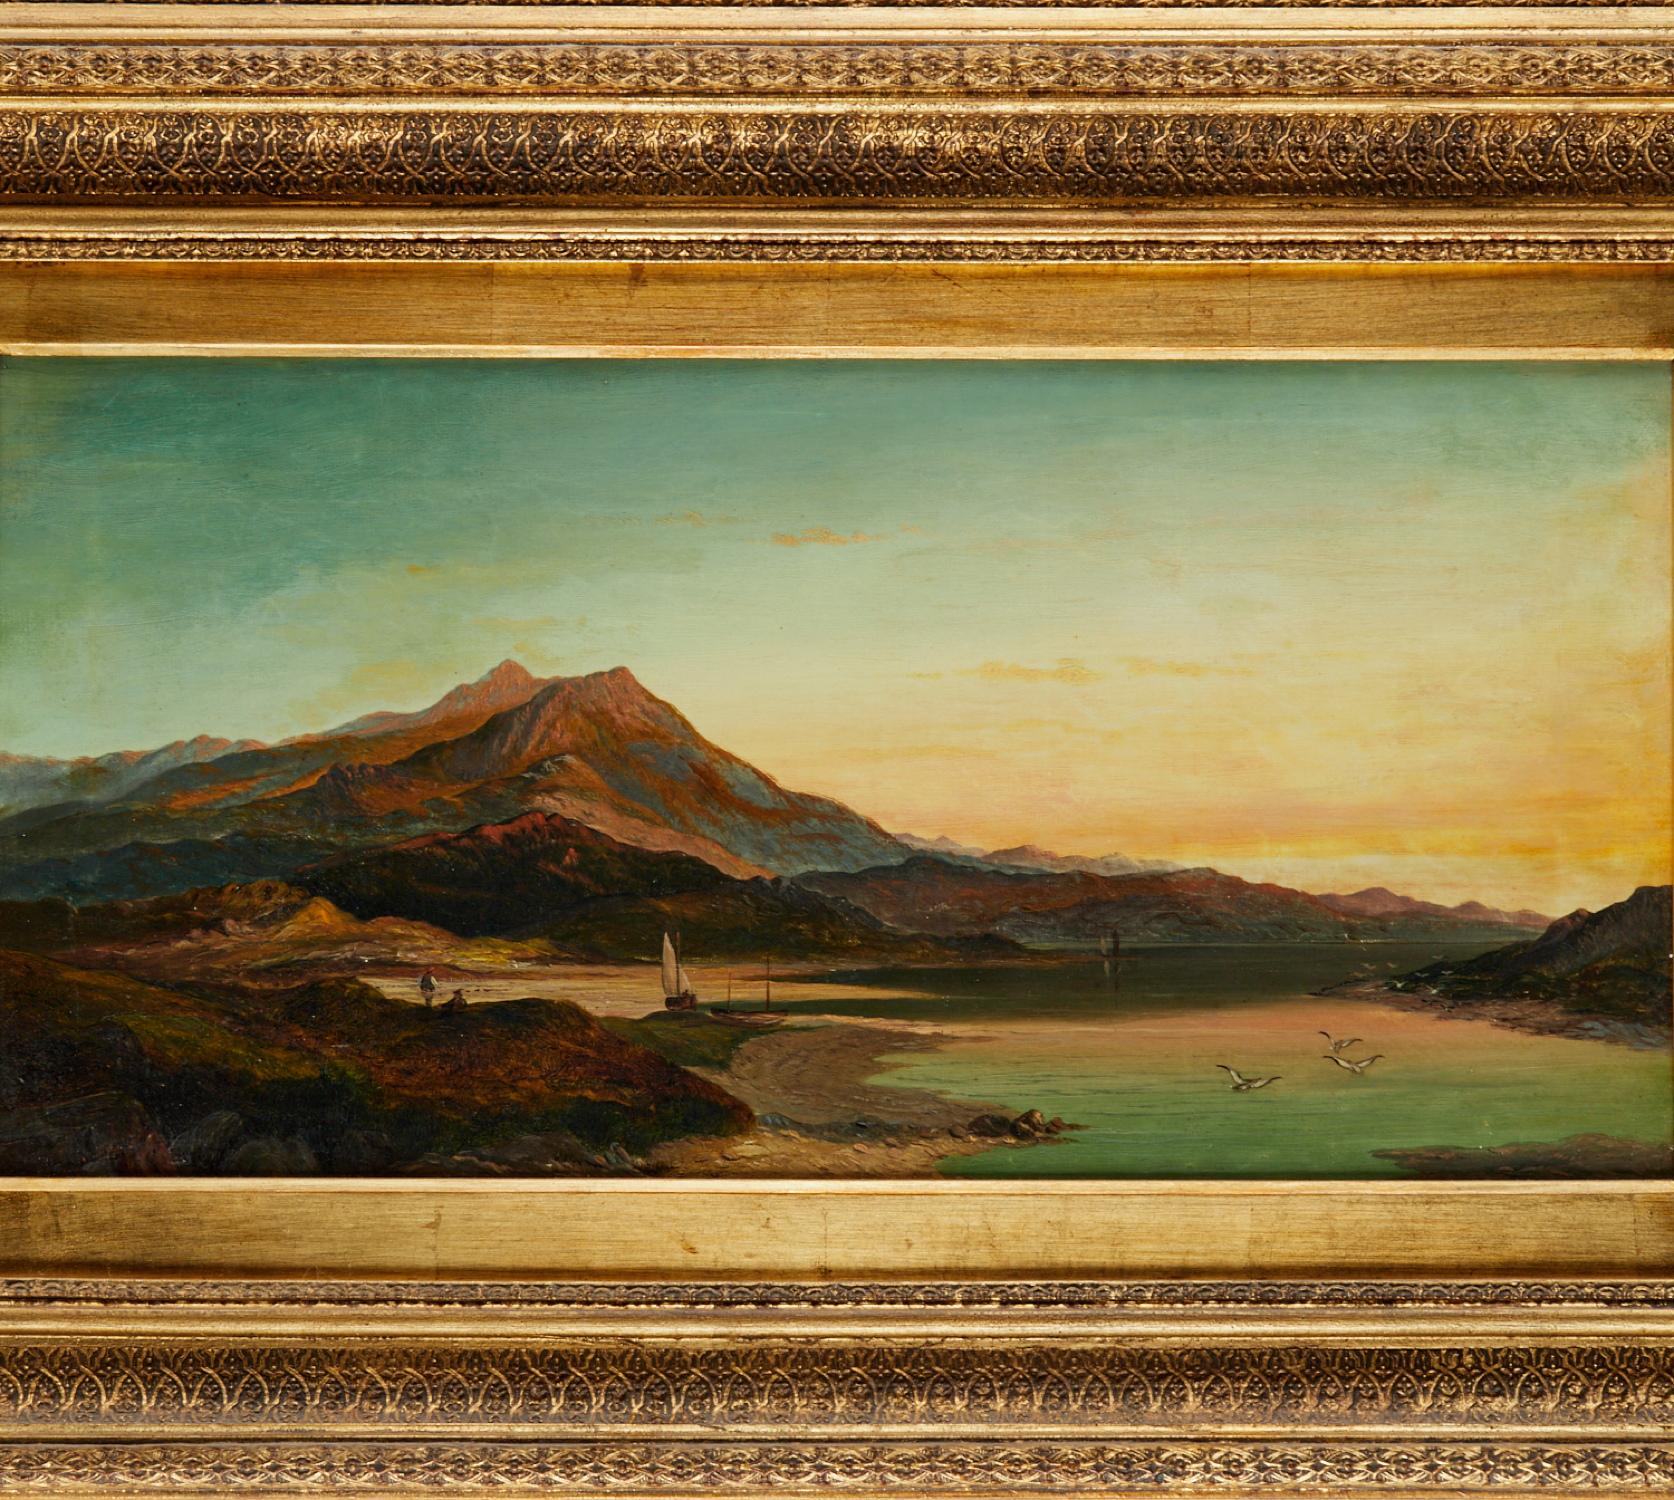 Attributed to Thomas O Hume (British, 19th c.), Seaside Landscape, oil on canvas, no signature observed, label on verso. A beautiful landscape, with a great balance of color and composition. The canvas is in a vintage English frame.

Thomas O Hume